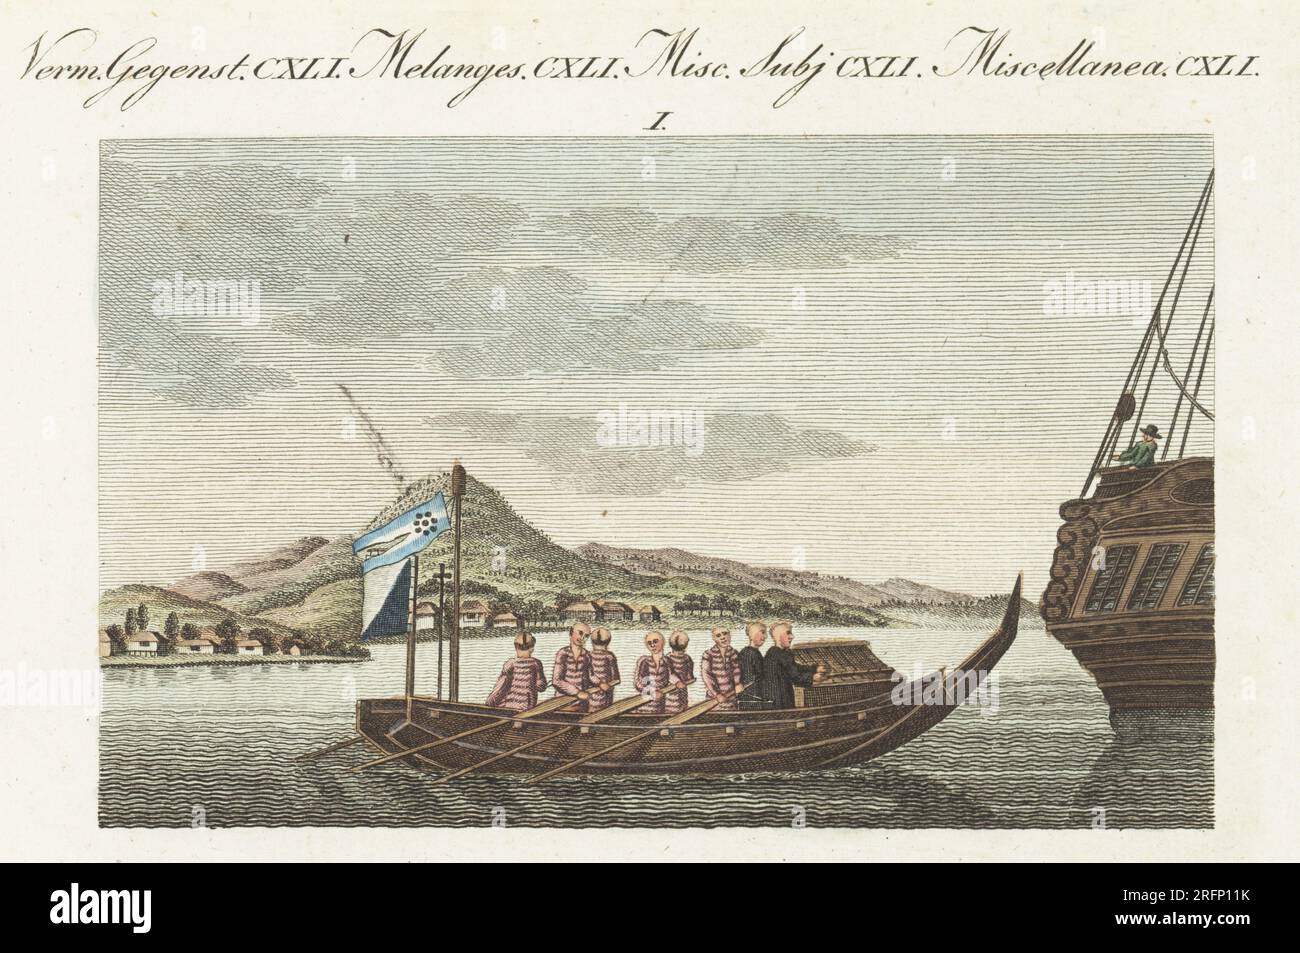 Two Japanese officials and six sailors of Daimyo Nabeshima of Hizen Province on a row boat to Captain Adam Johann von Krusenstern's ship Nadezhda near Nagasaki, Japan, 1804. The Japanese later ejected Russian Ambassador Nikolay Rezanov. Handcoloured copperplate engraving from Carl Bertuch's Bilderbuch fur Kinder (Picture Book for Children), Weimar, 1810. Stock Photo